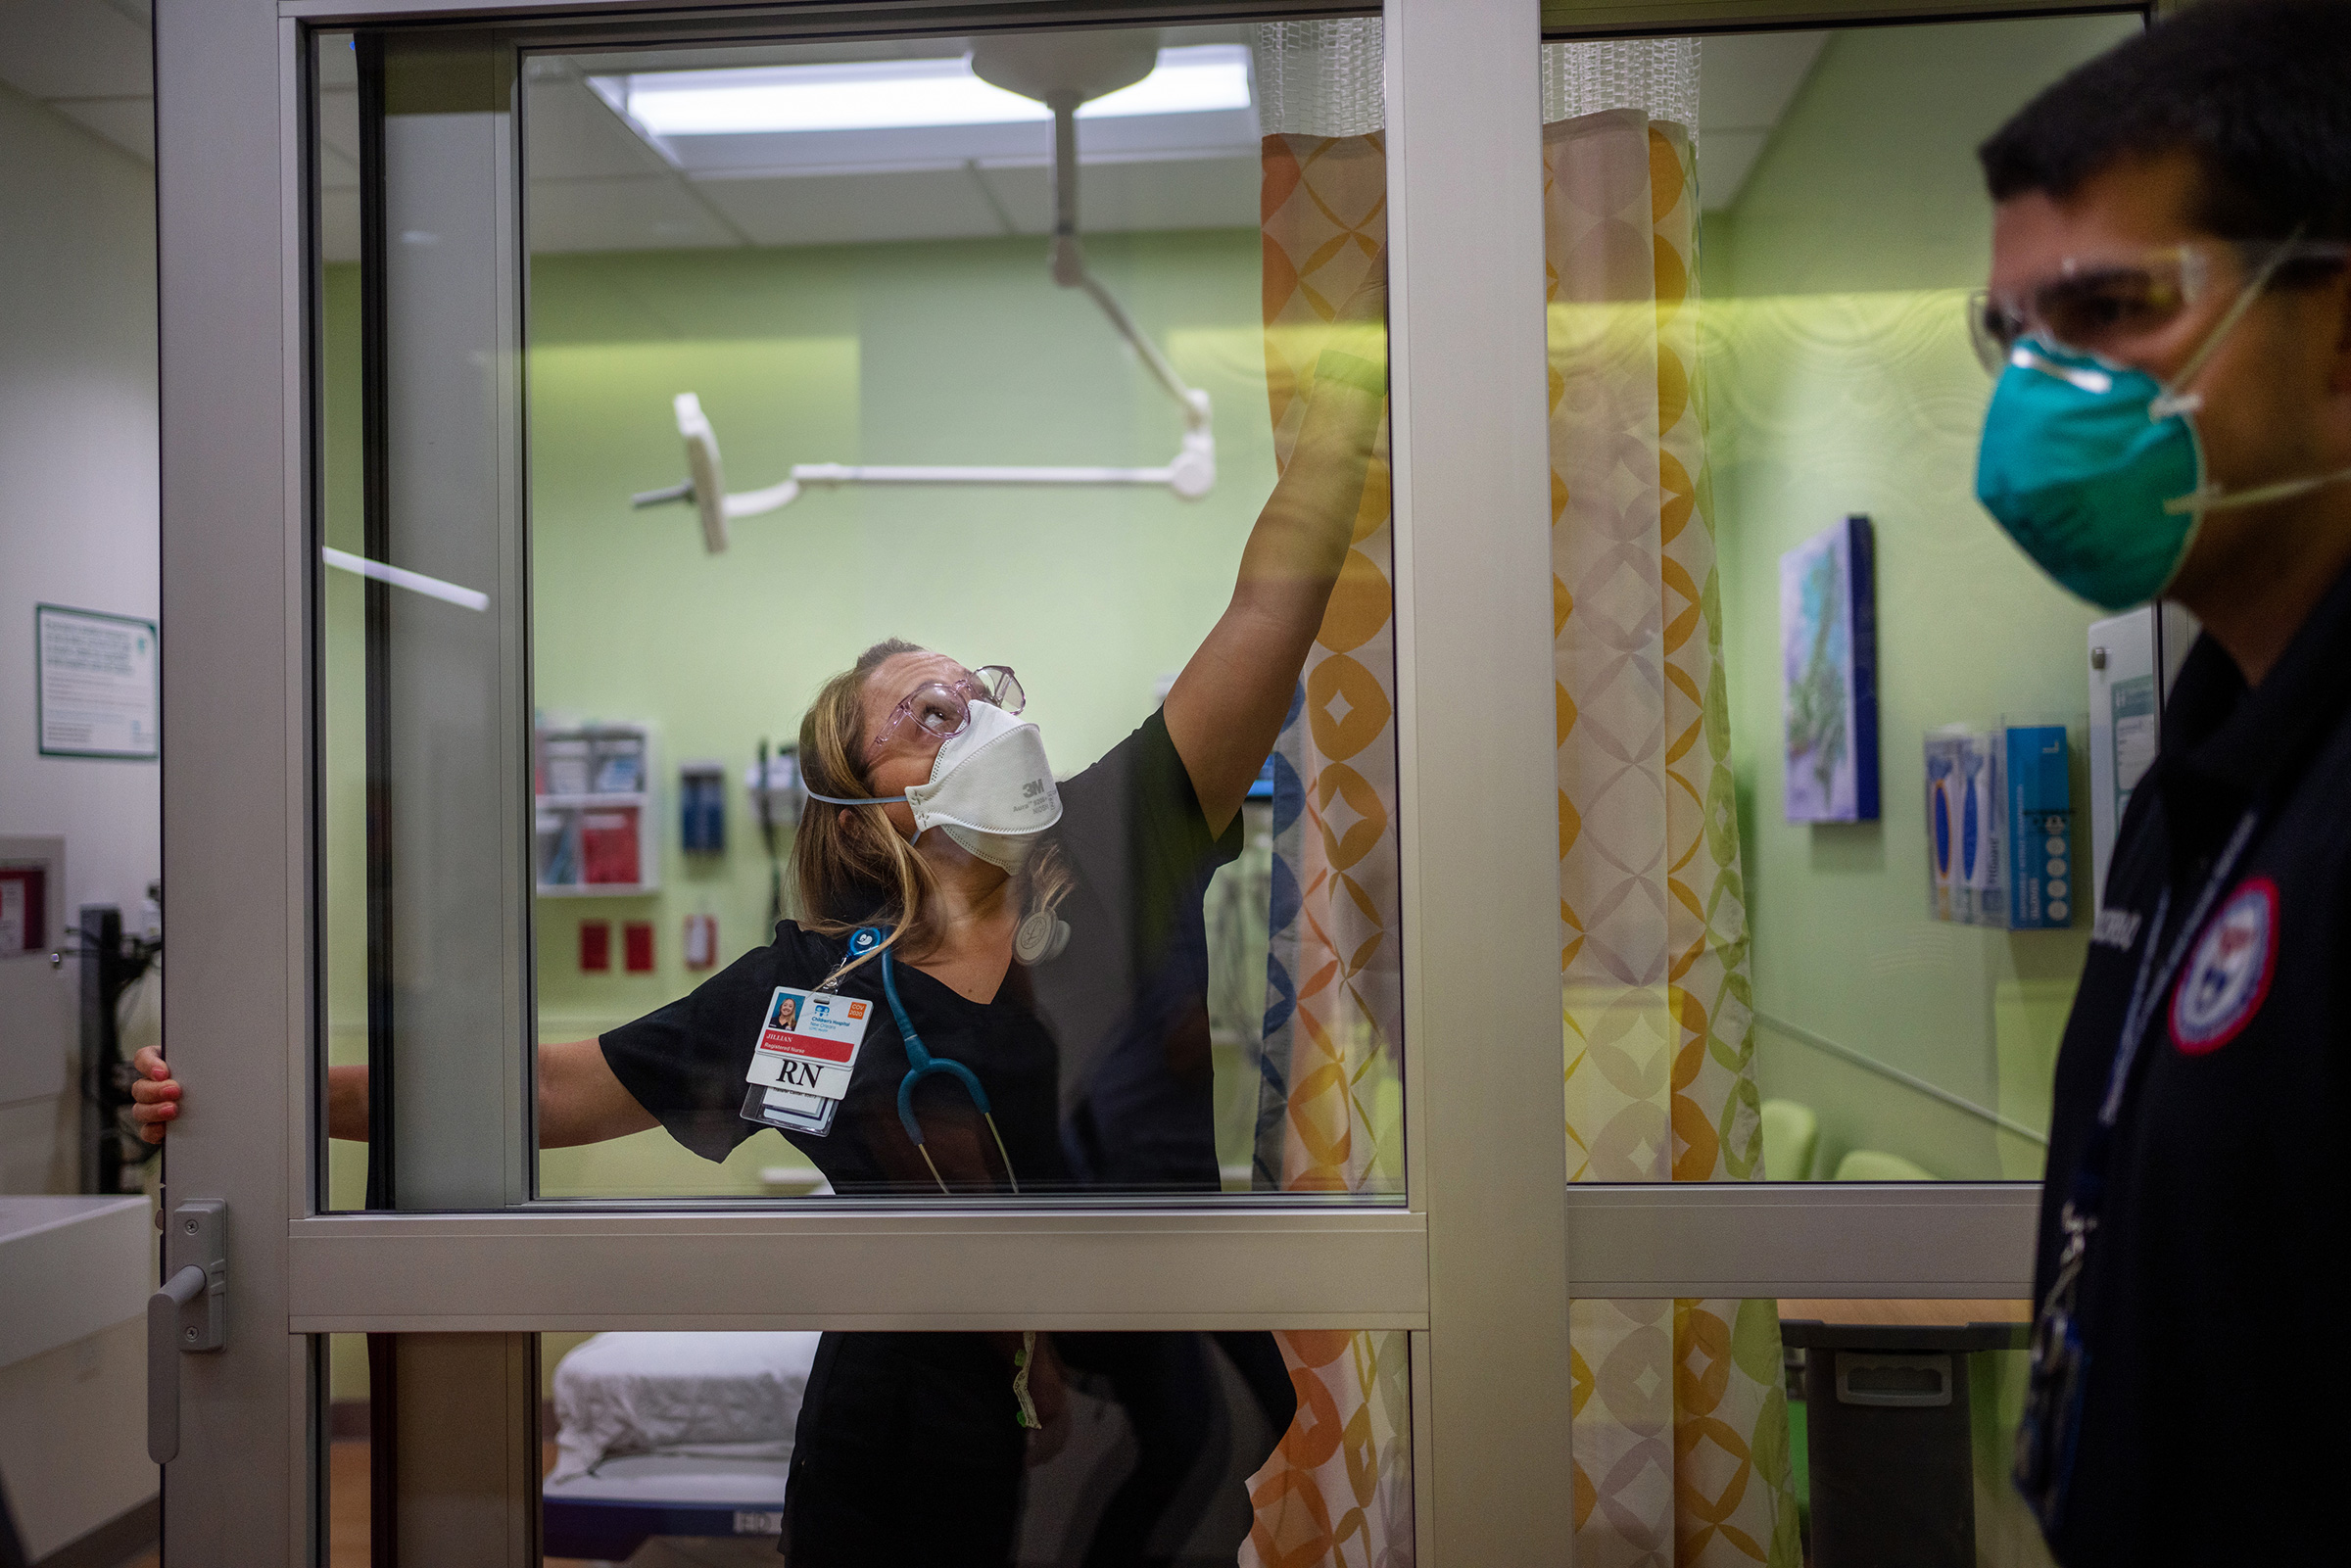 Jillian Nickerson tries to fix a stuck door in a newly opened room in the emergency department at Children’s Hospital New Orleans on Aug. 20, while Paul Decerbo from the Rhode Island-1 Disaster Medical Assistance Team looks on.